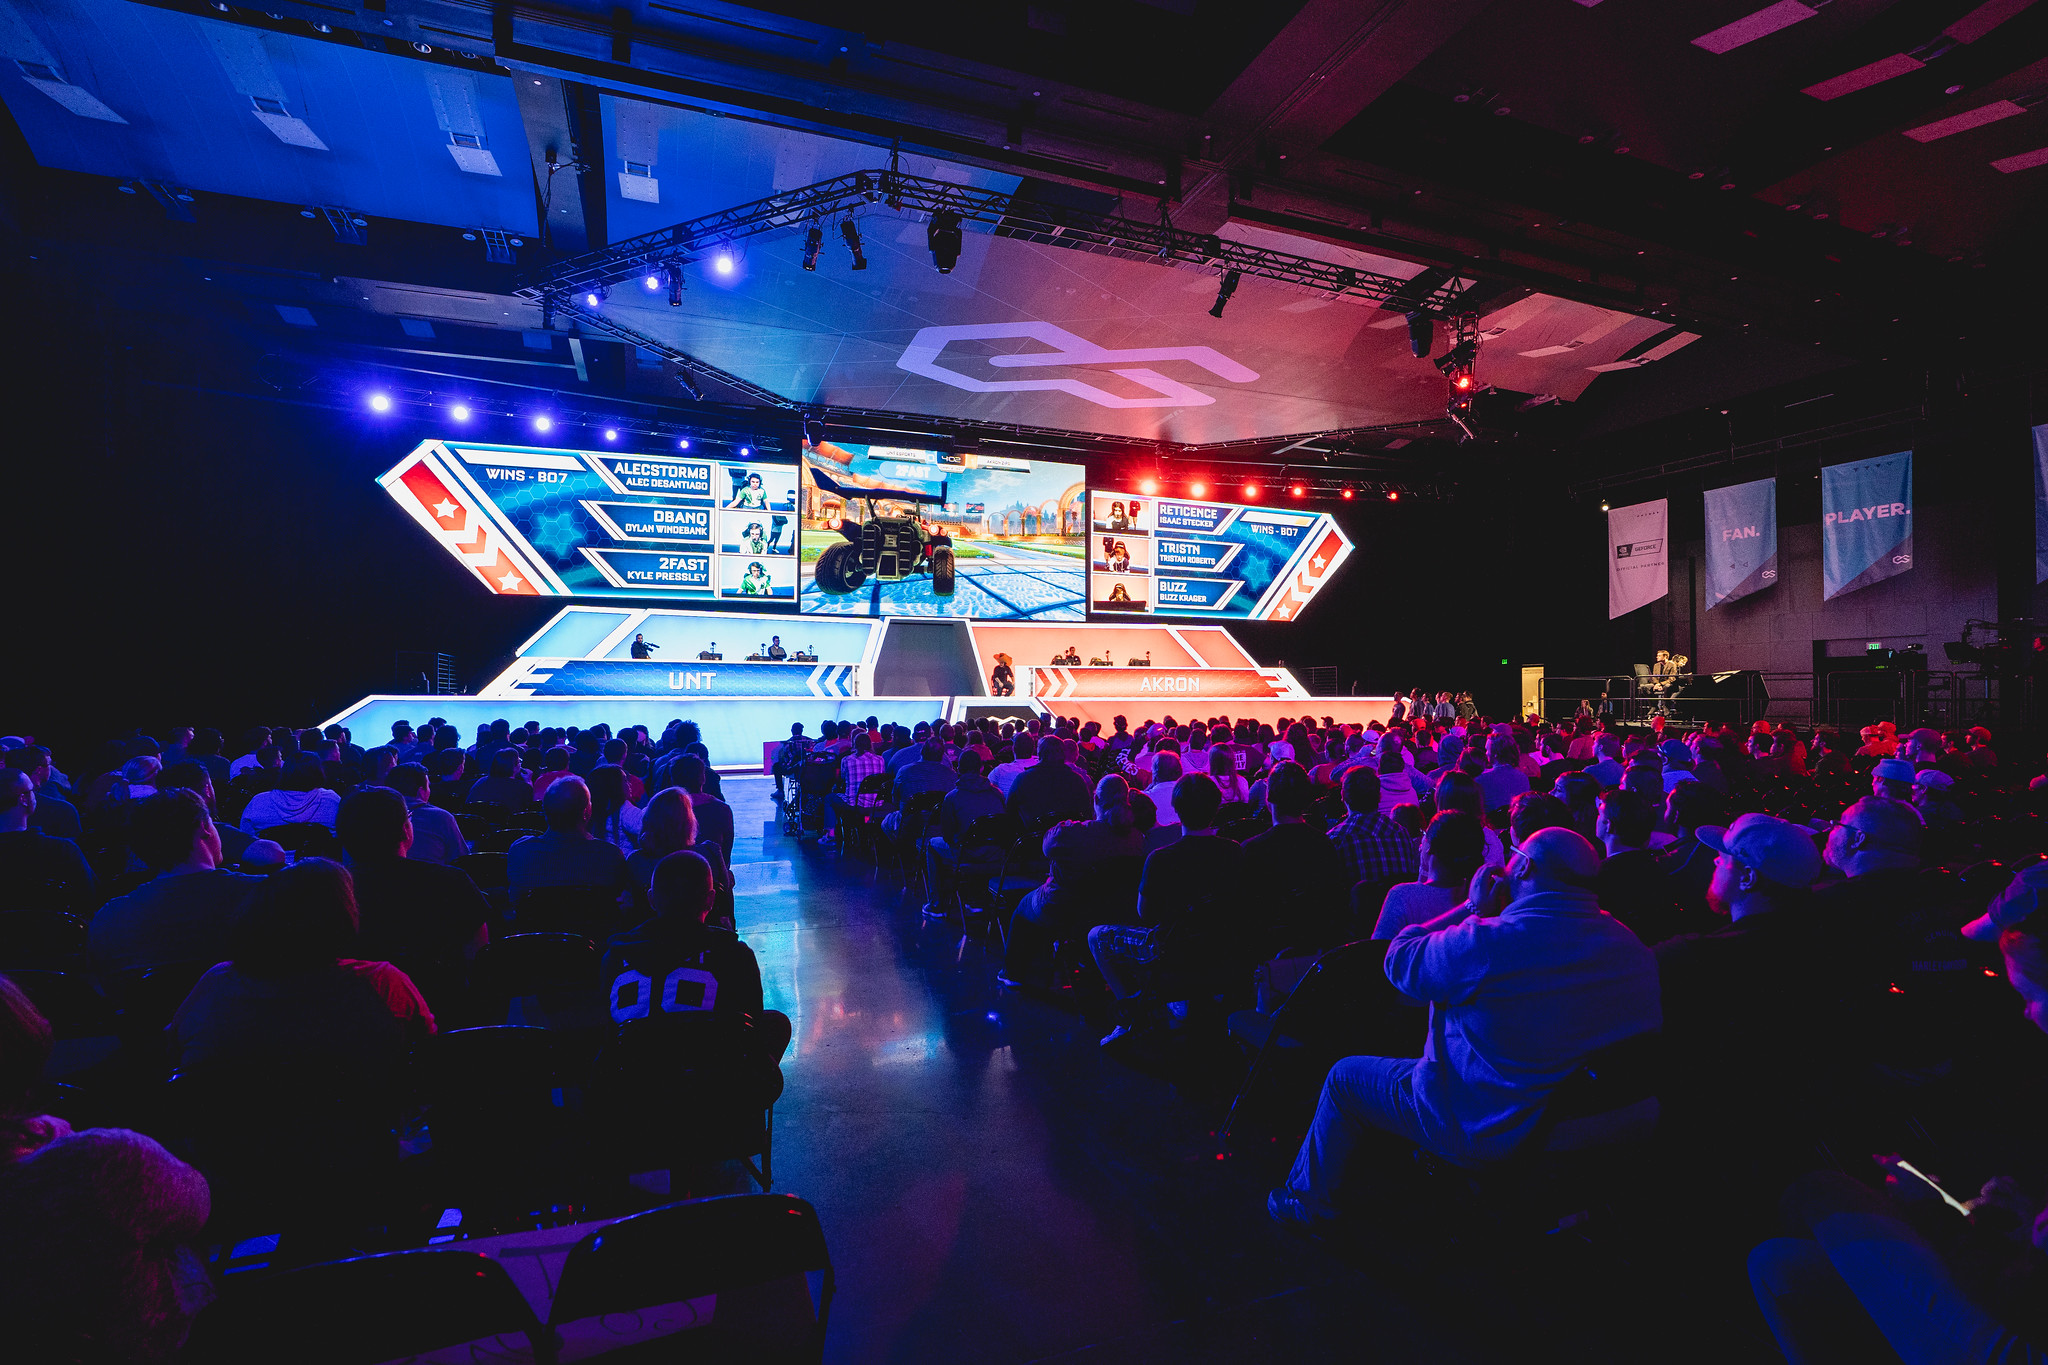 CRL 19 National Championship Stage and Crowd